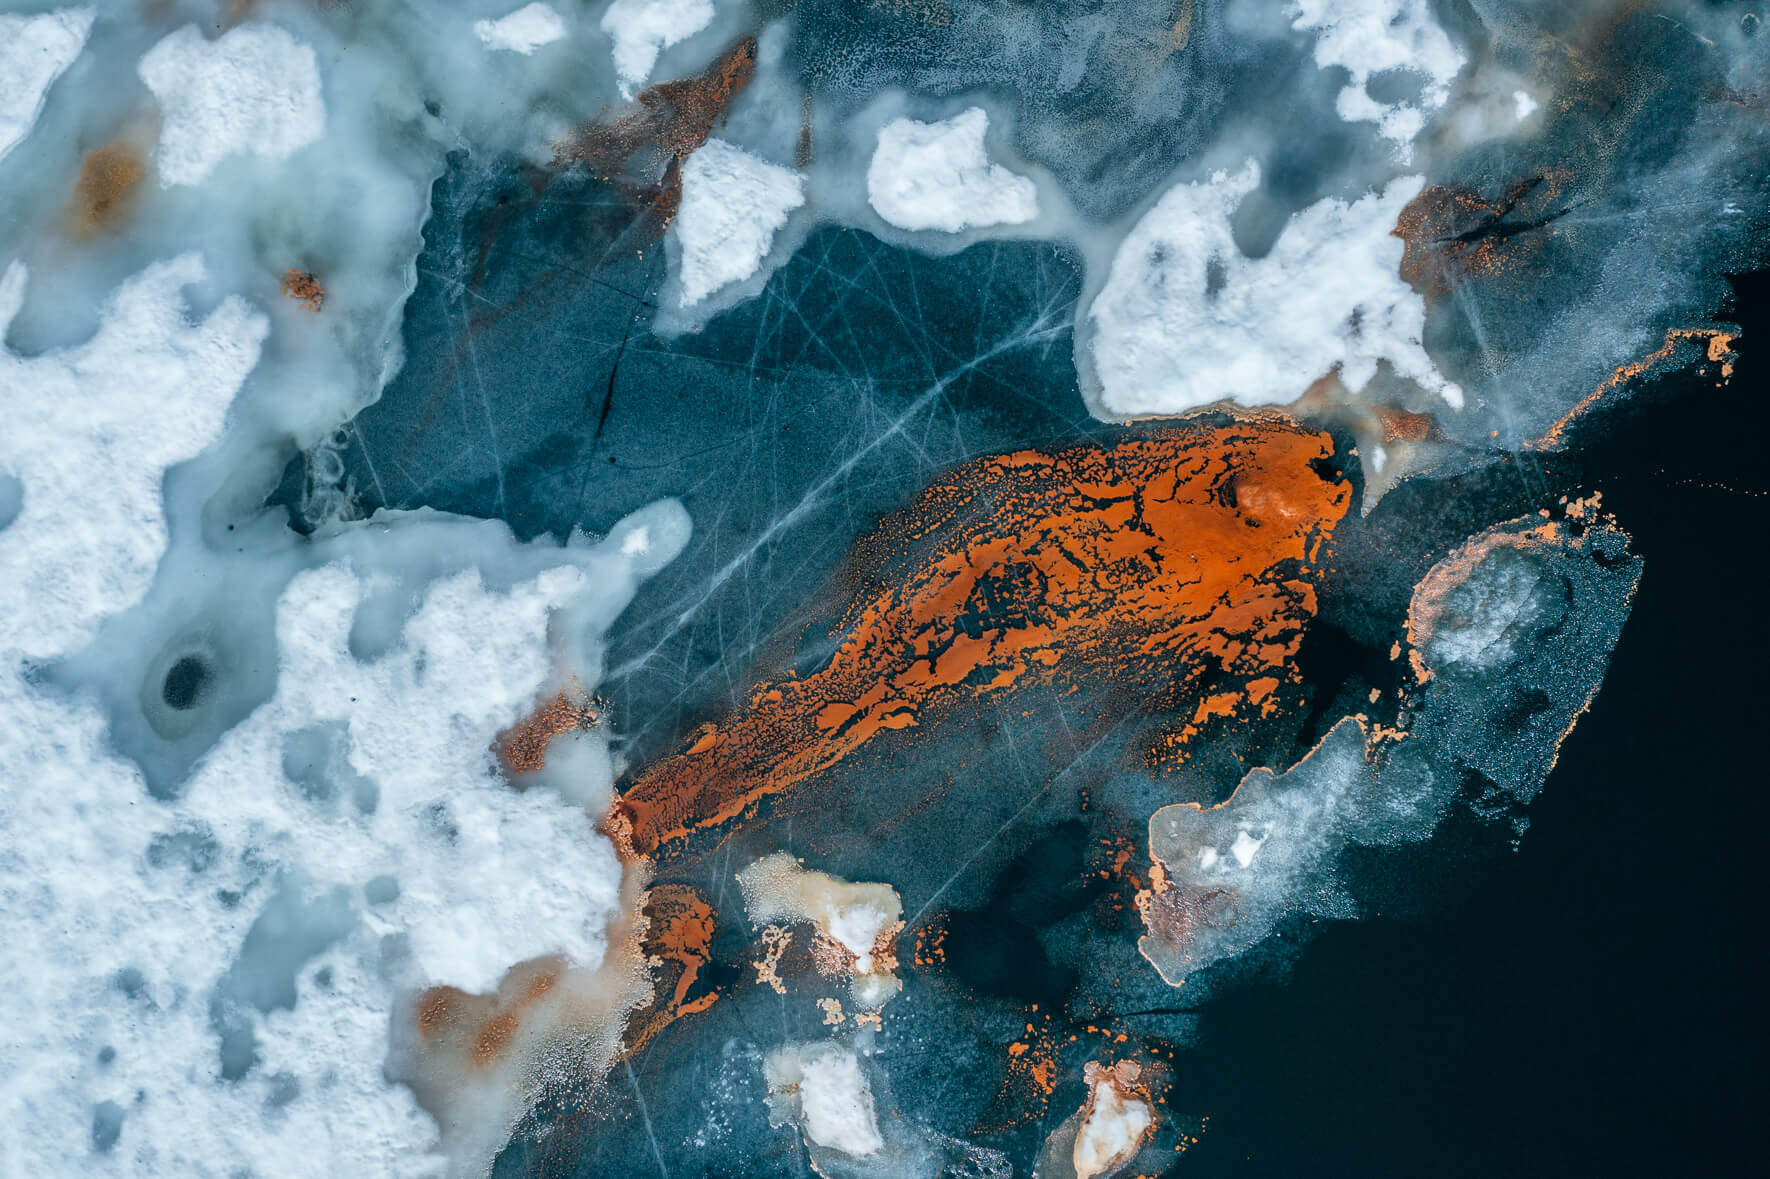 Abstract aerial photography of winter landscapes in Norway by Jan Erik Waider